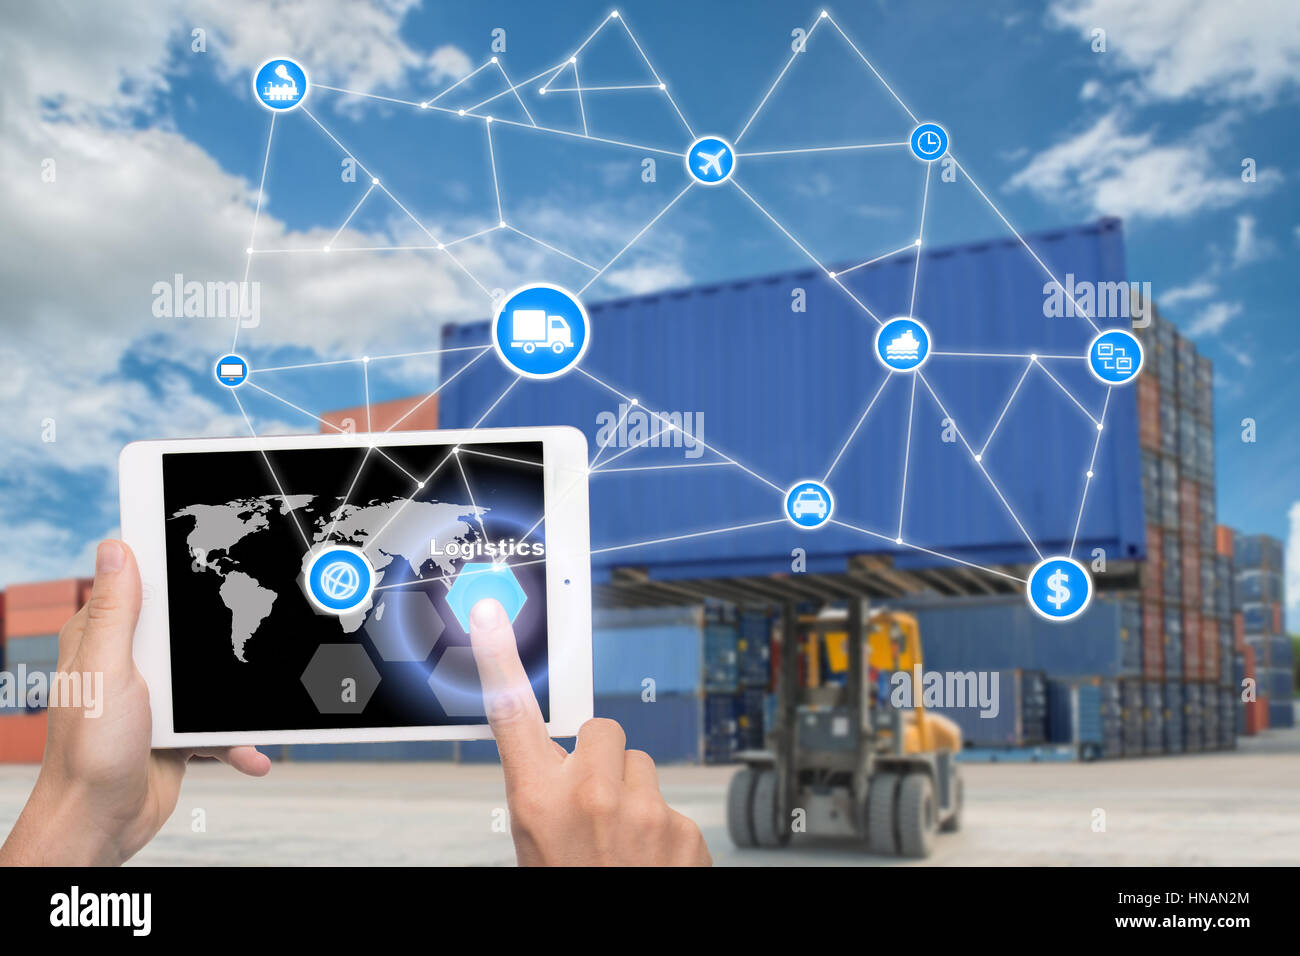 Hand holding tablet is pressing button Logistics connection technology interface global partner connection for logistic import export background. Busi Stock Photo